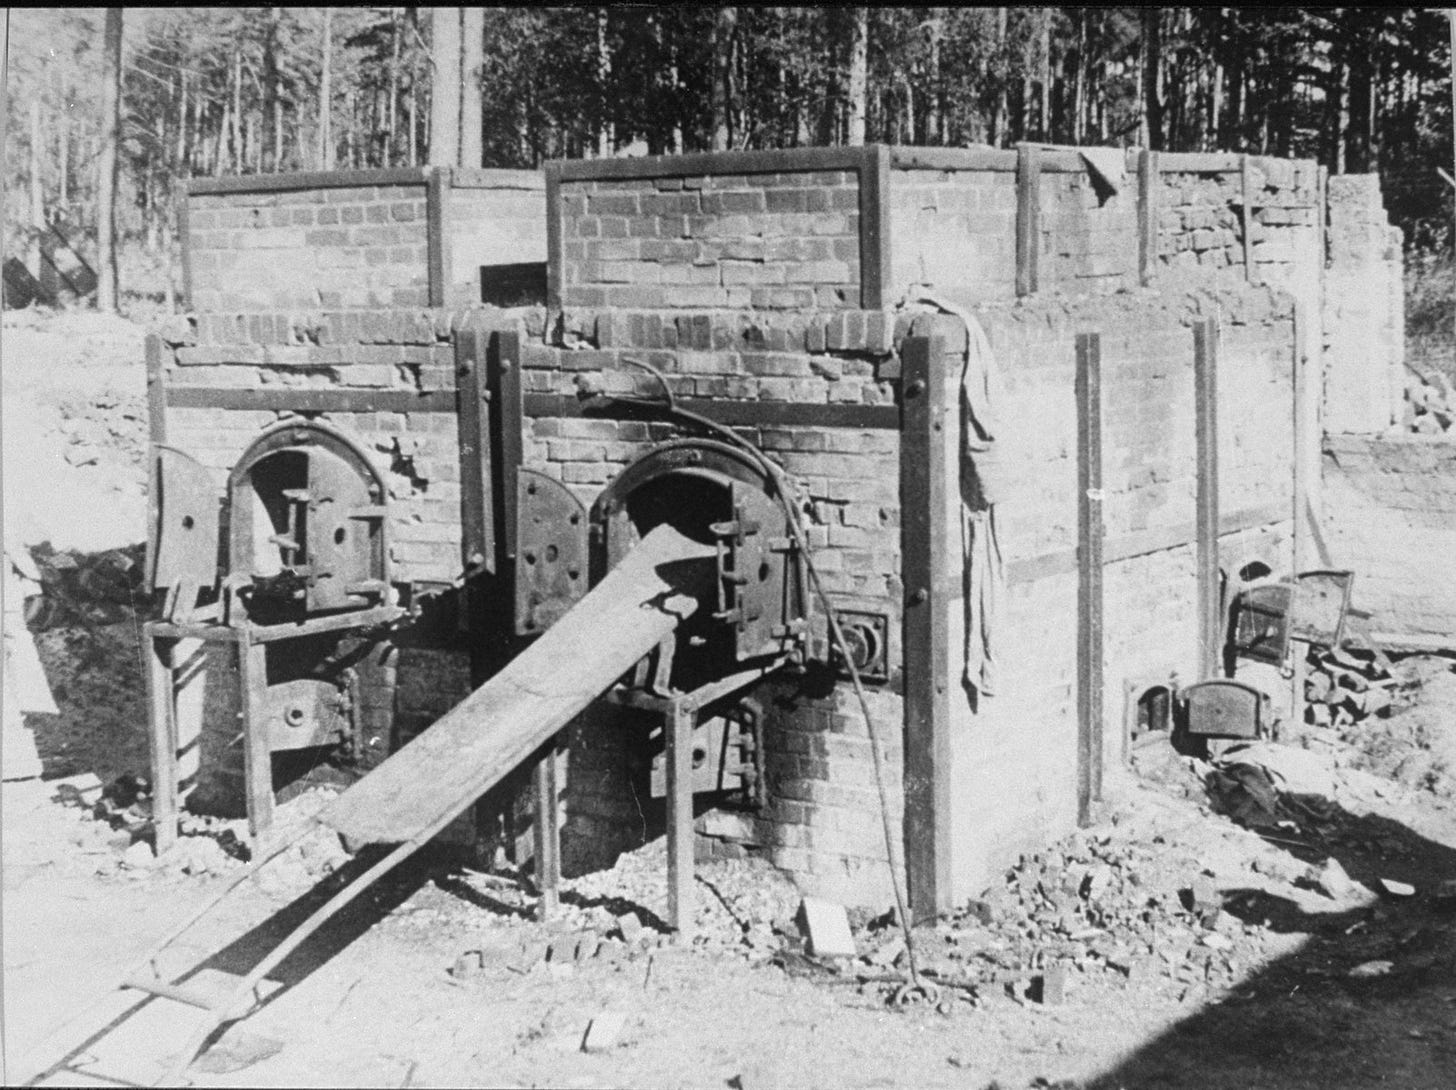 View of two ovens of the crematorium at the Stutthof concentration camp after the liberation.